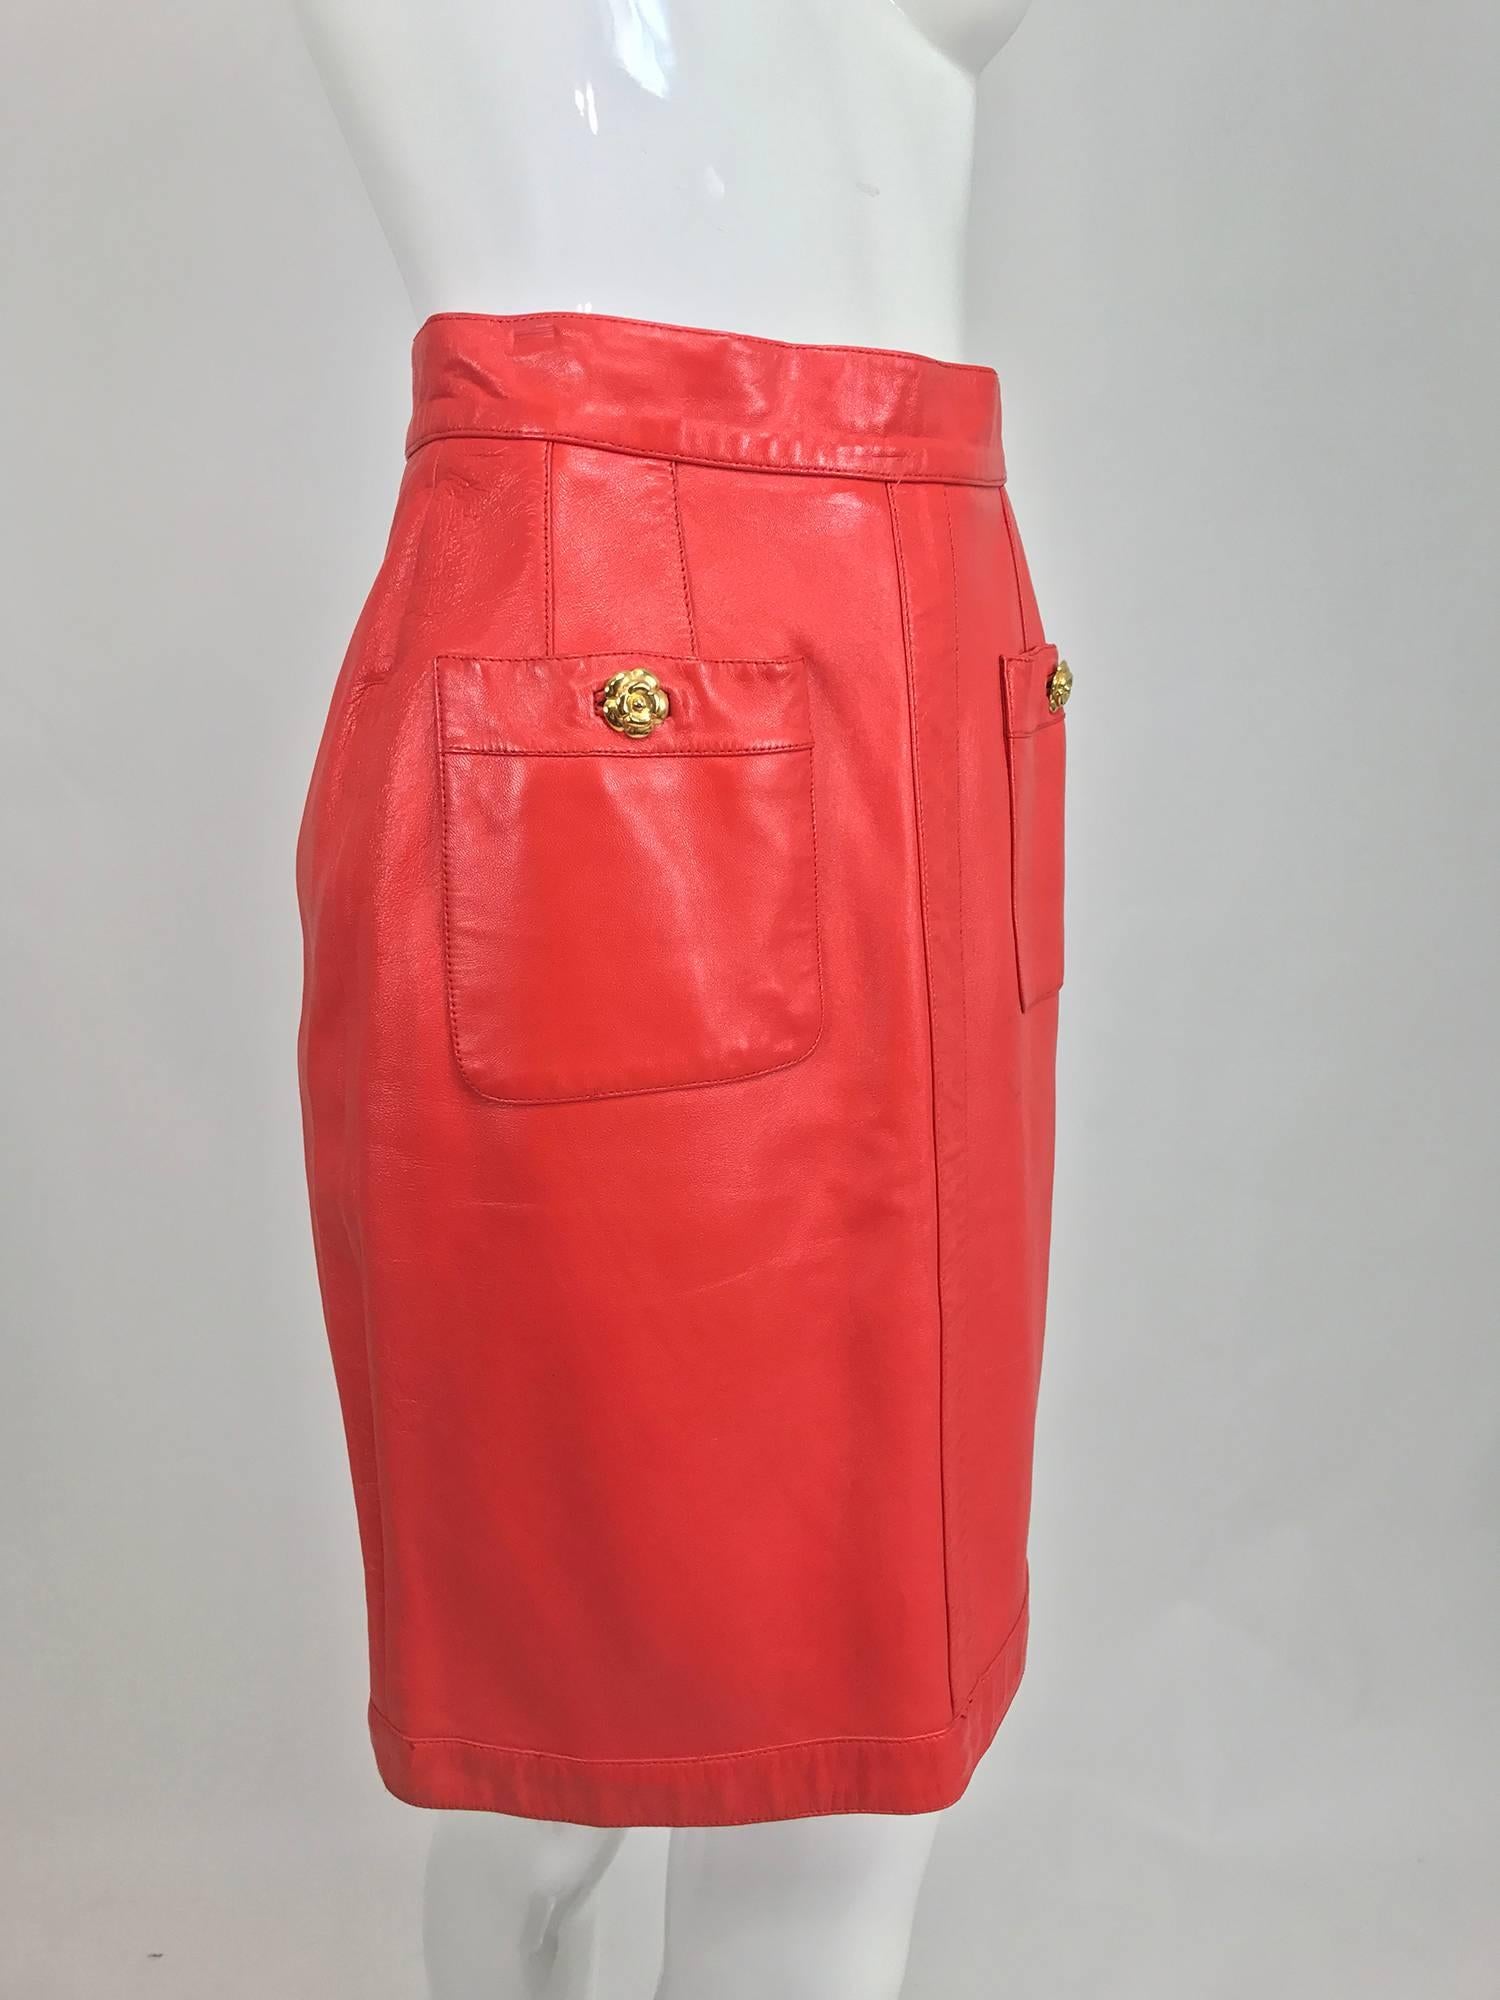 Chanel Vintage 1990s coral red leather skirt with pockets...Soft leather skirt sits at the natural waist, is fitted through the hip and falls straight to the hem...Two hip front patch pockets close with gold Chanel camellia flower buttons, lots of